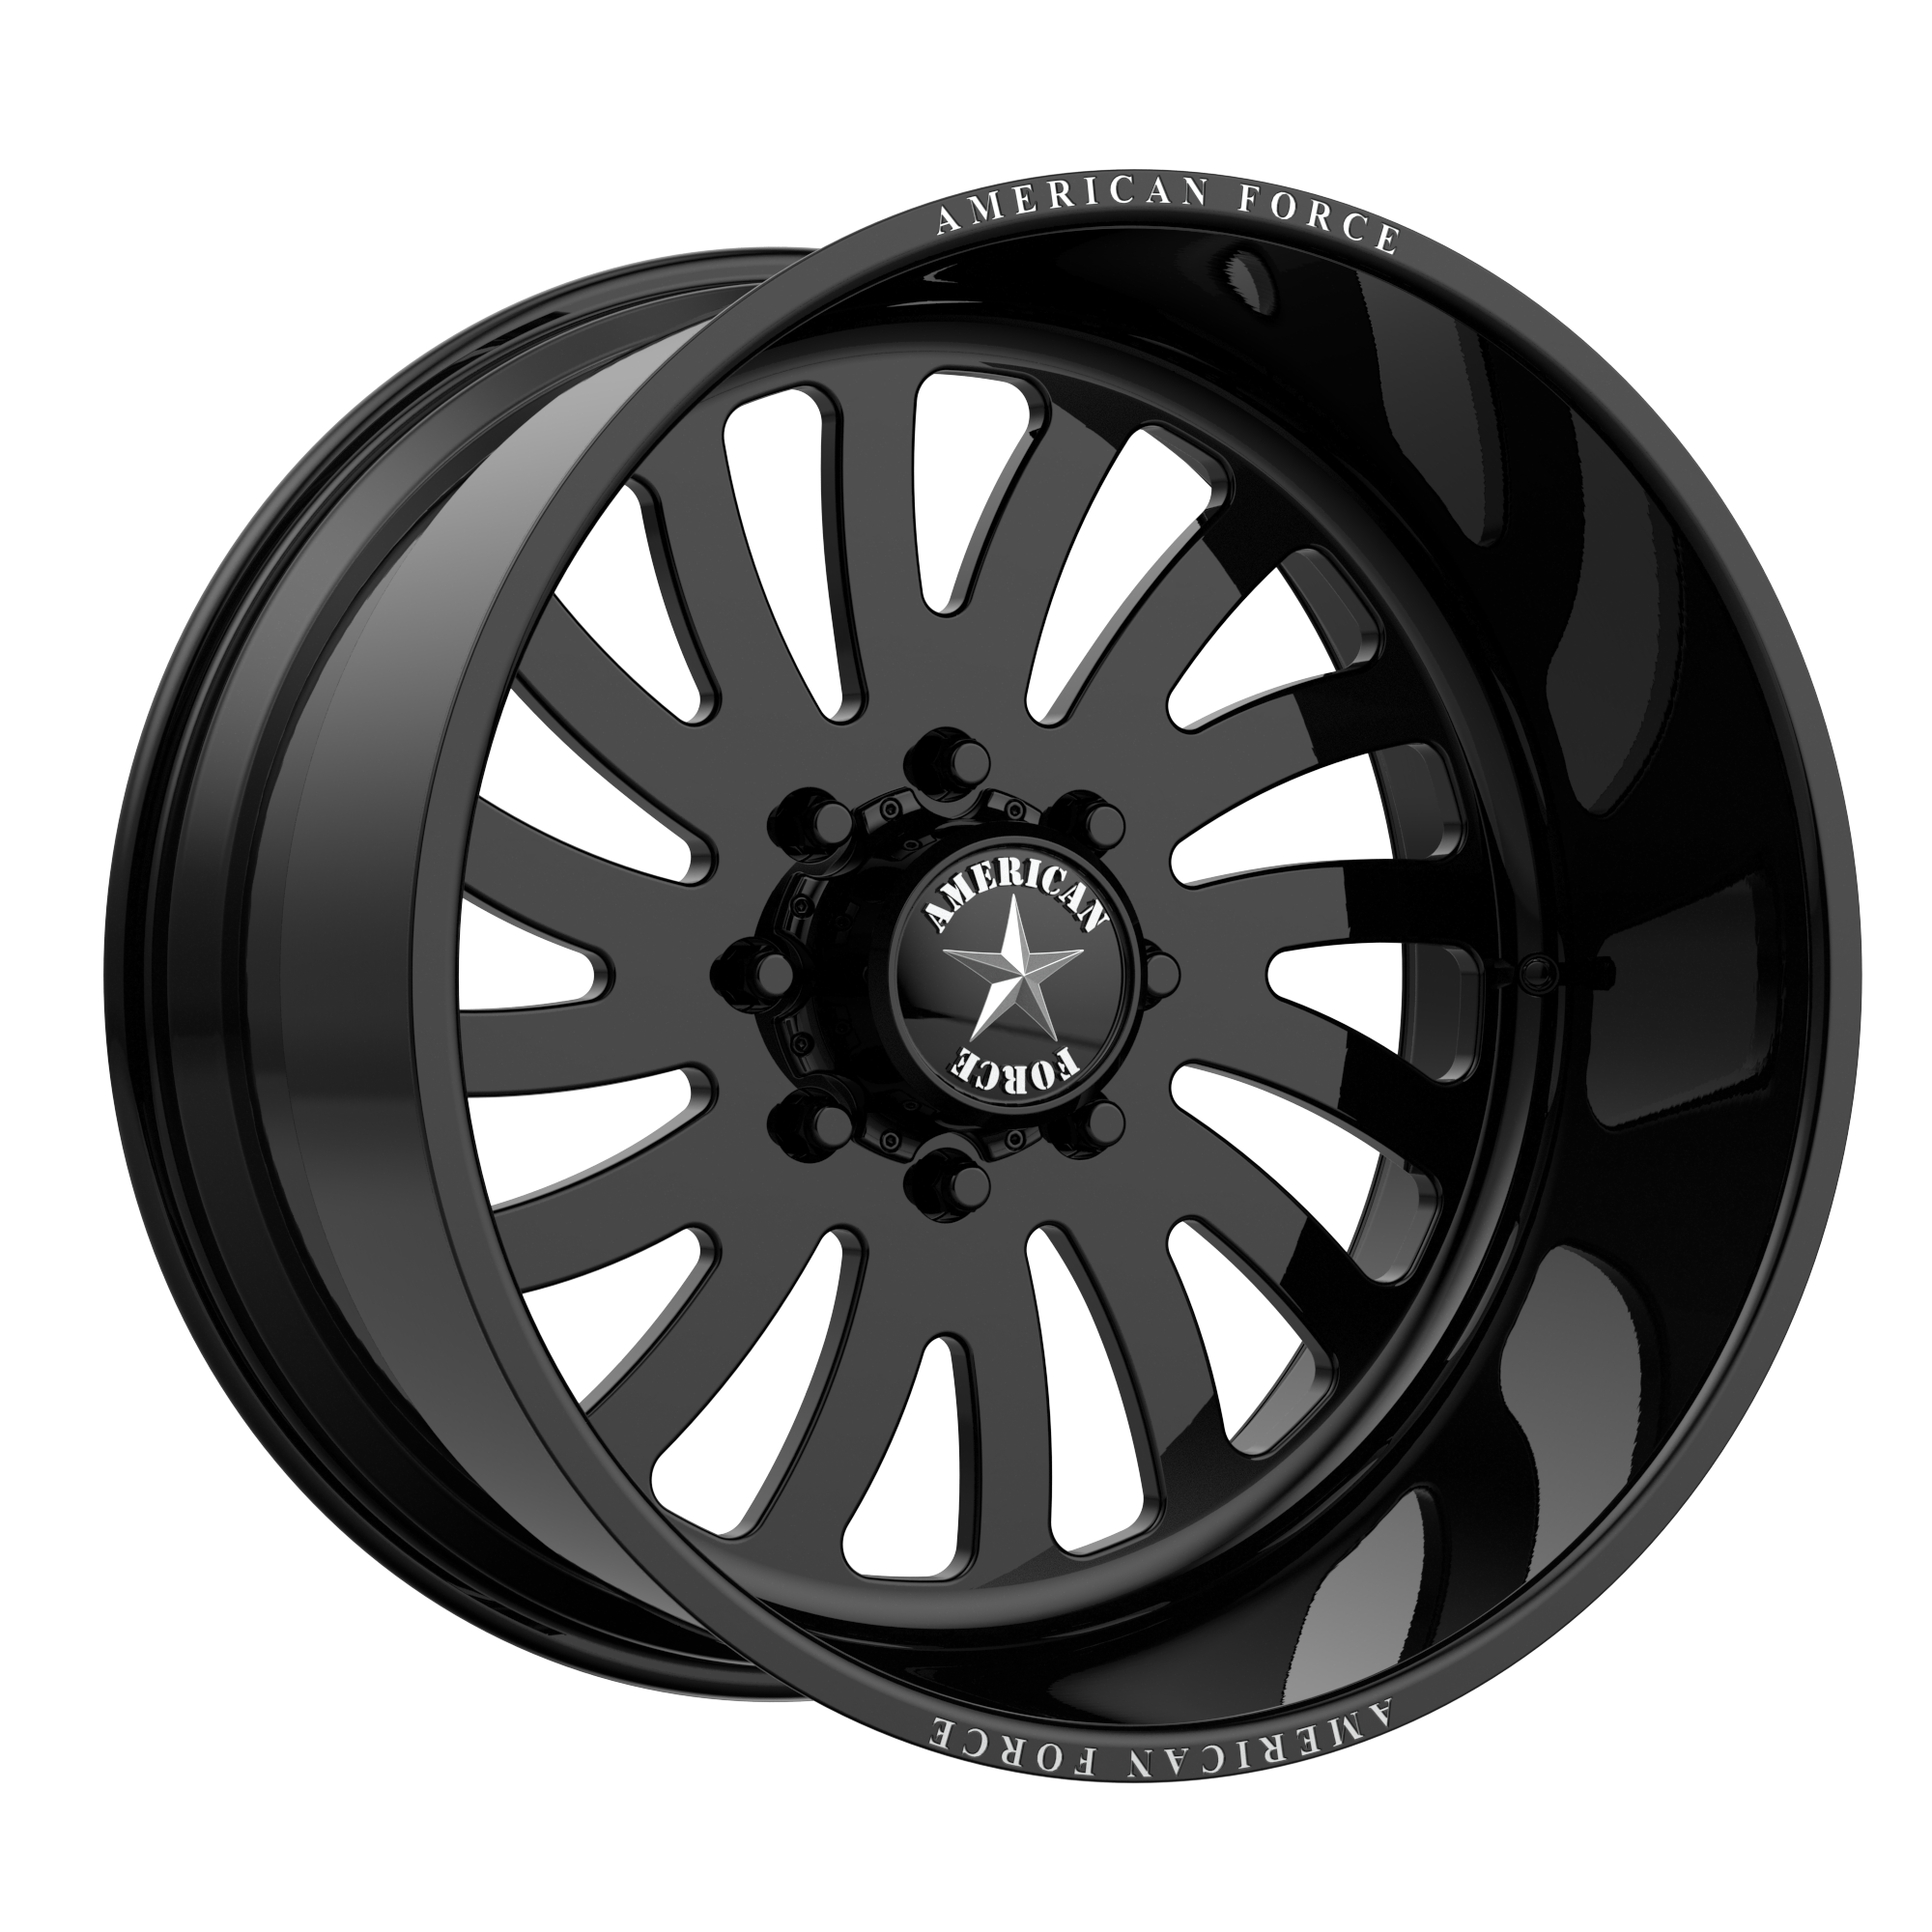 OCTANE SS 22x14 6x135.00 GLOSS BLACK MACHINED (-73 mm) - Tires and Engine Performance